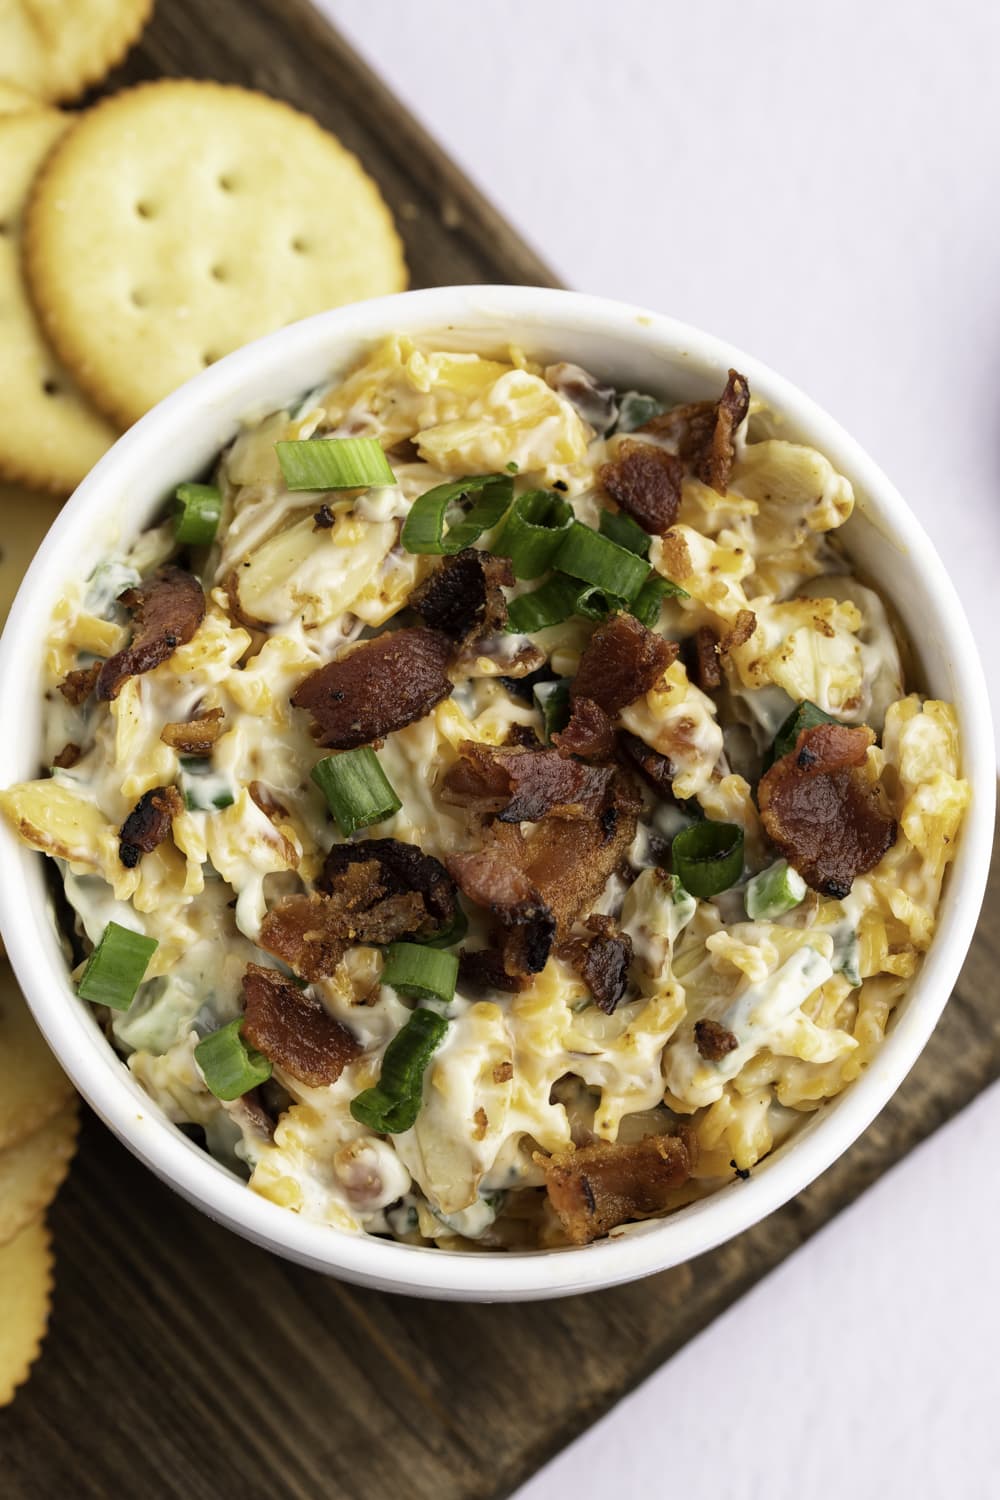 Cheesy dip in a bowl with toasted almonds, bacon crumbles, and cheddar cheese.